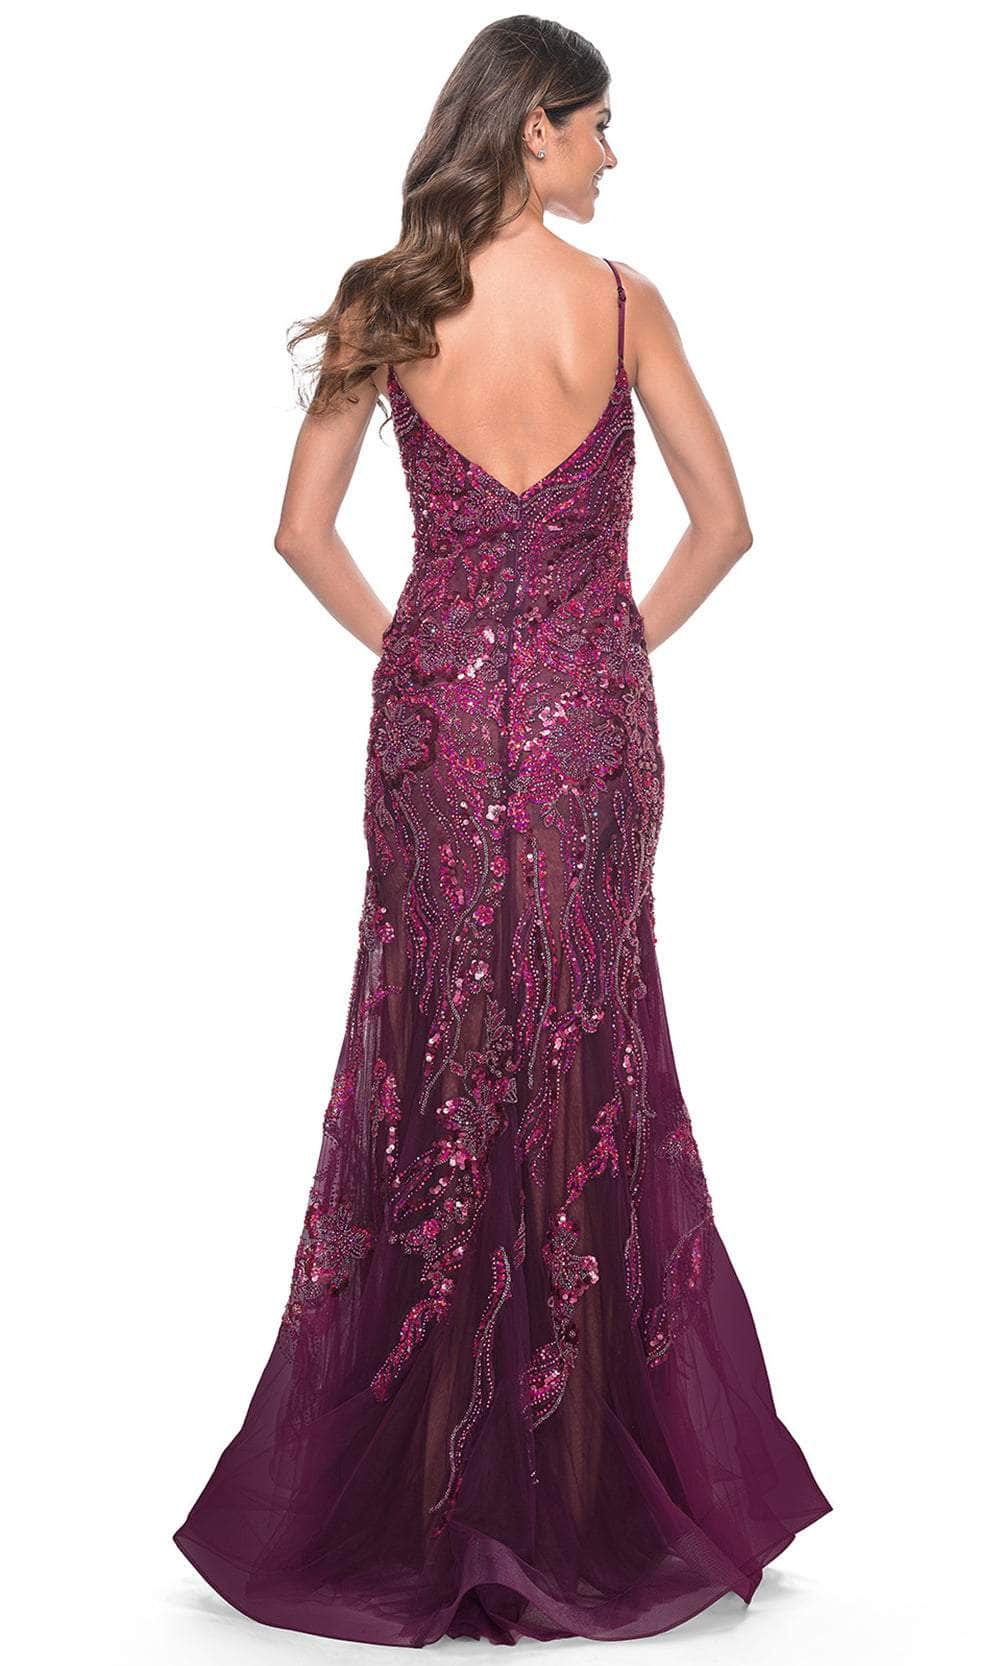 La Femme 32049 - Sleeveless Sequin Prom Dress Special Occasion Dresses